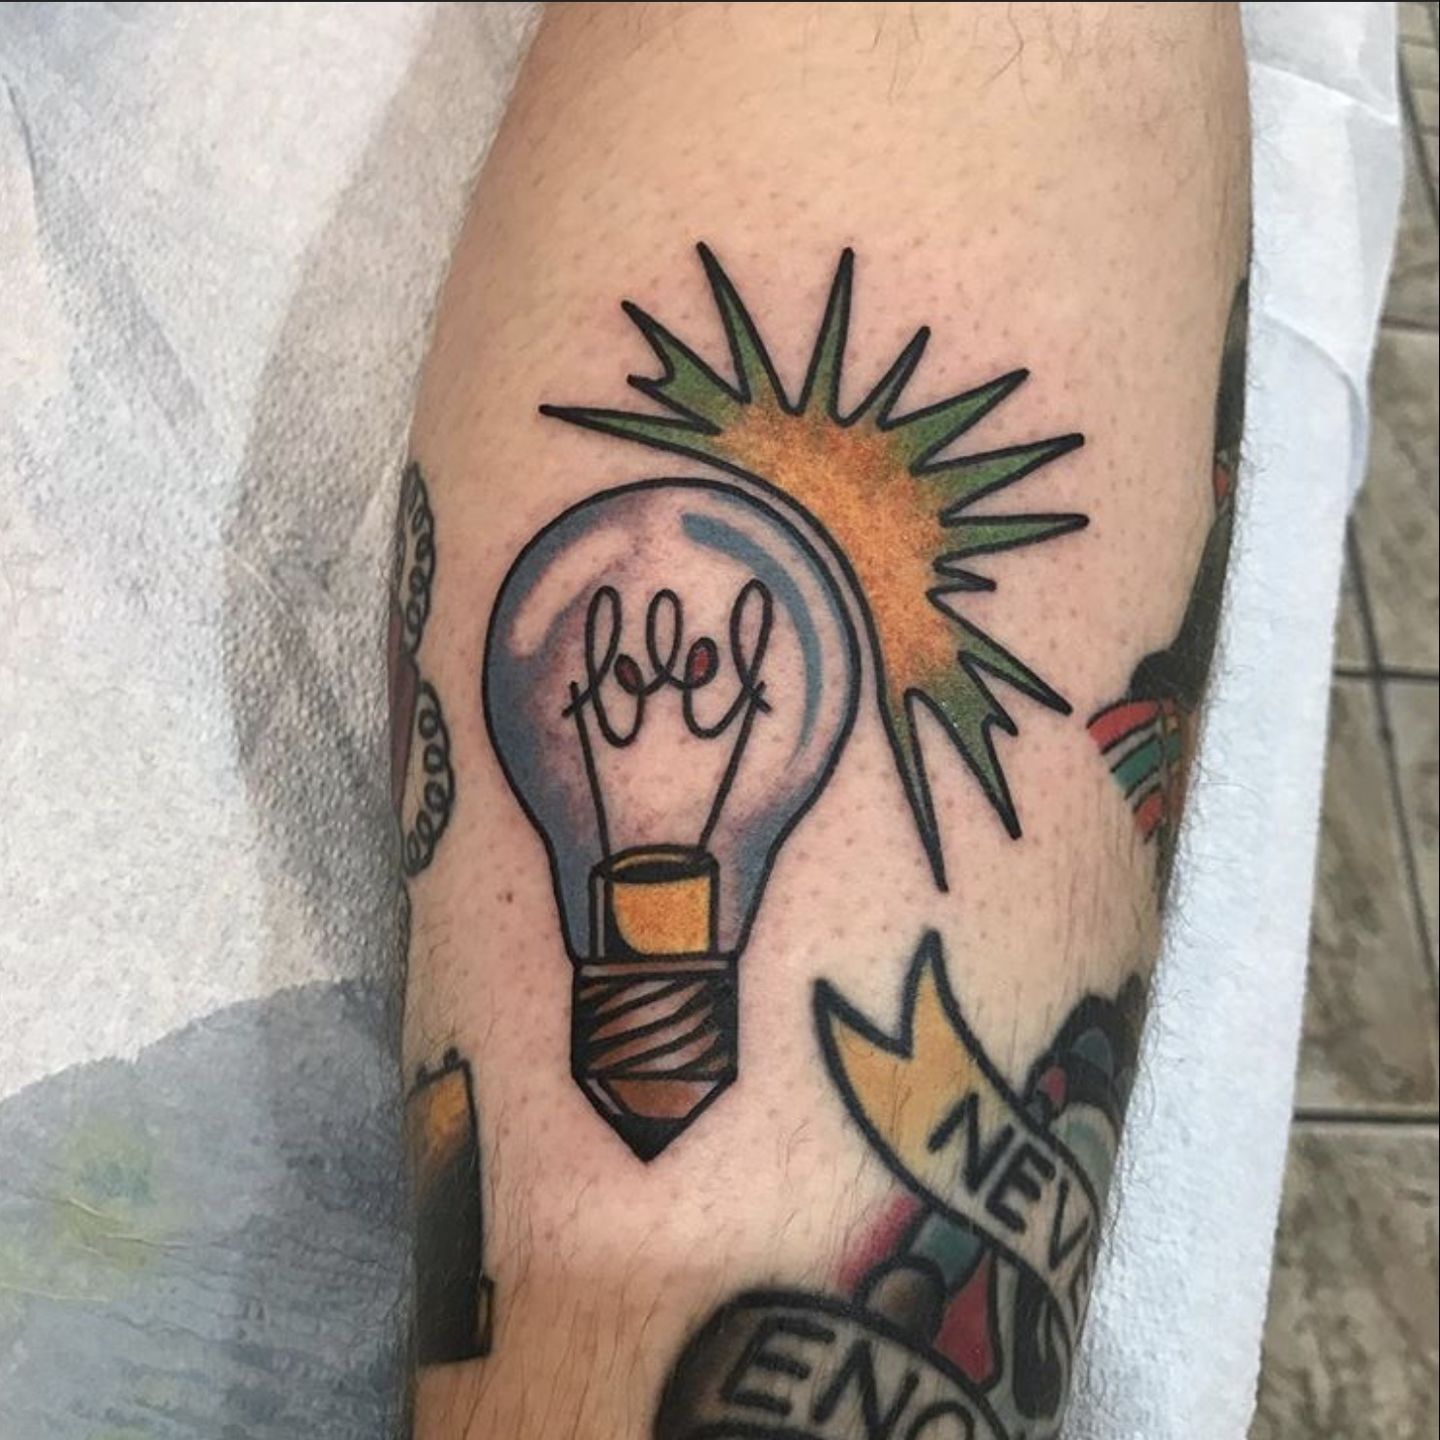 Exploding light bulb 💡💥 6” done with @anarchy_tattoo_supplies  @emalla.official @industryinks @balm_tattoo @fkirons @rareformottawa |  Instagram